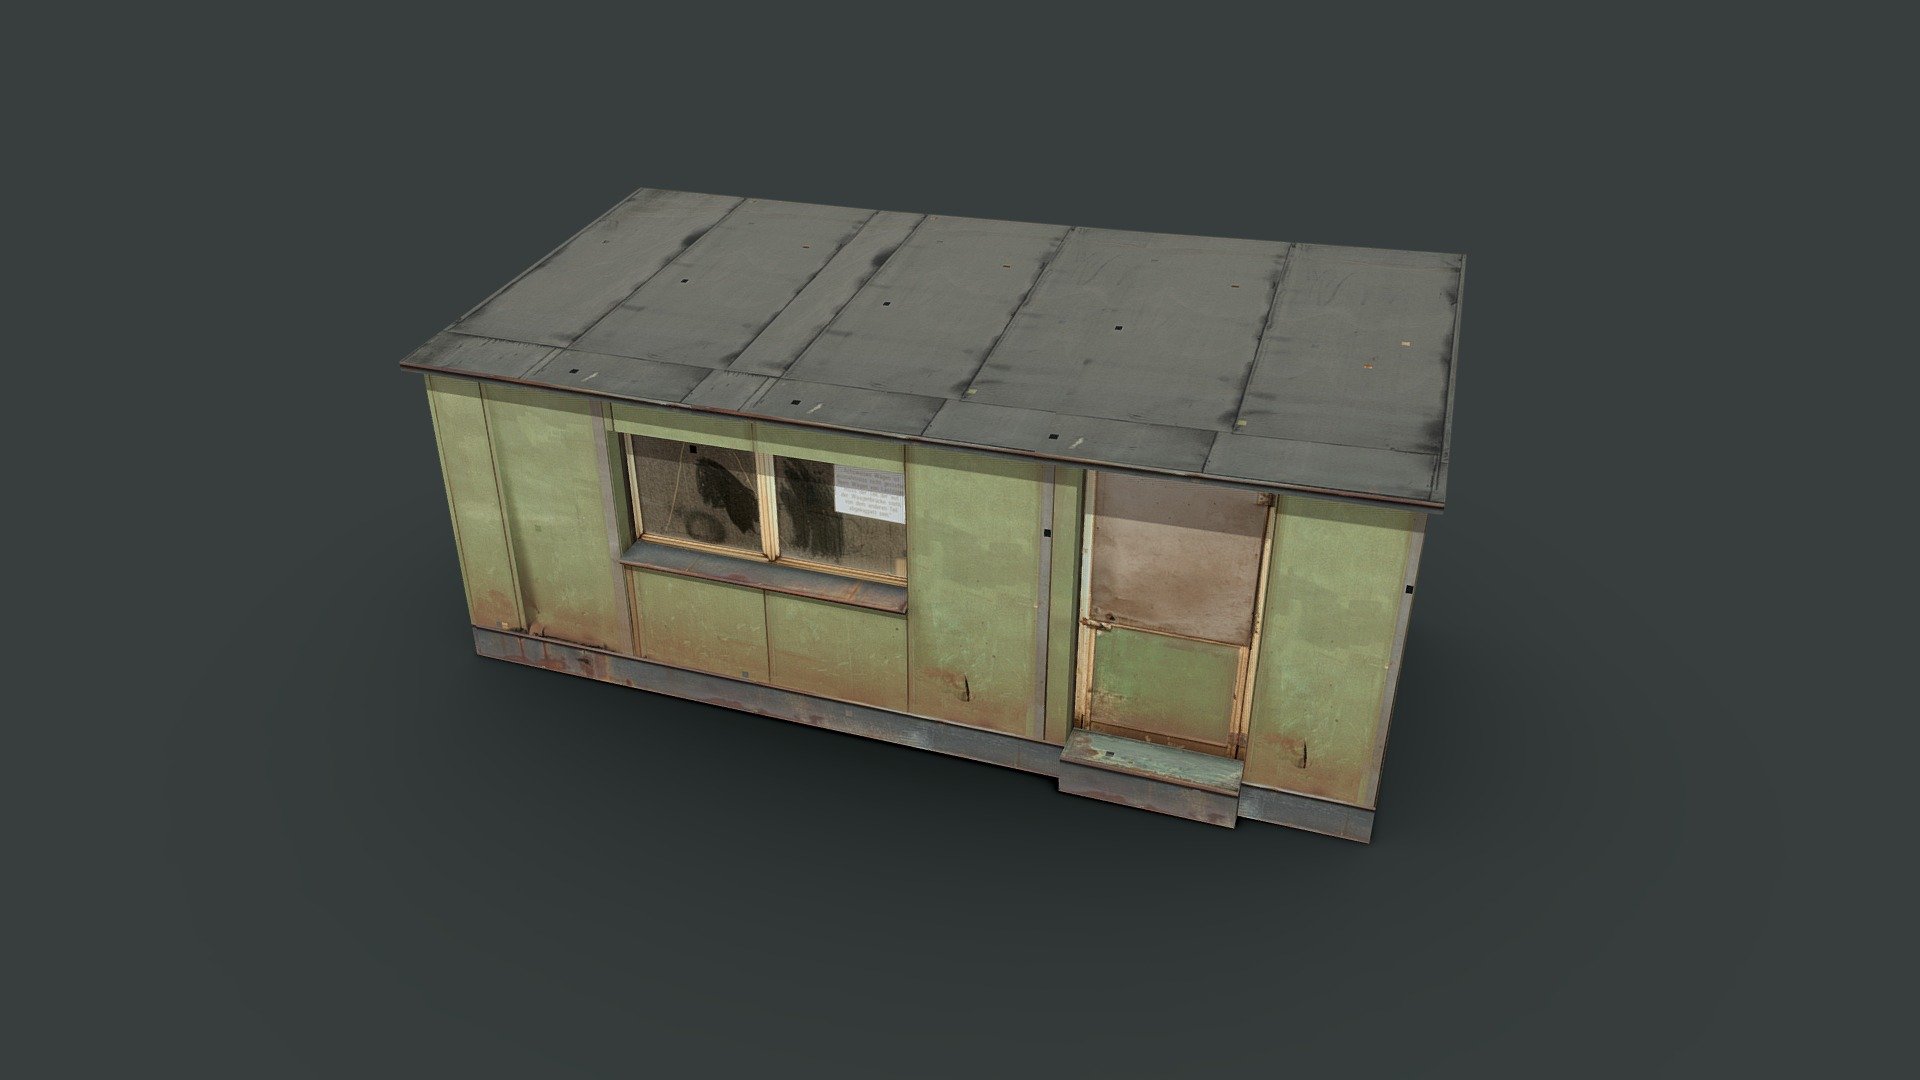 Barrack building - lowpoly game ready model

1K PBR Textures - Diffuse, Normal,  Roughness - Barrack 2 - Buy Royalty Free 3D model by l0wpoly 3d model